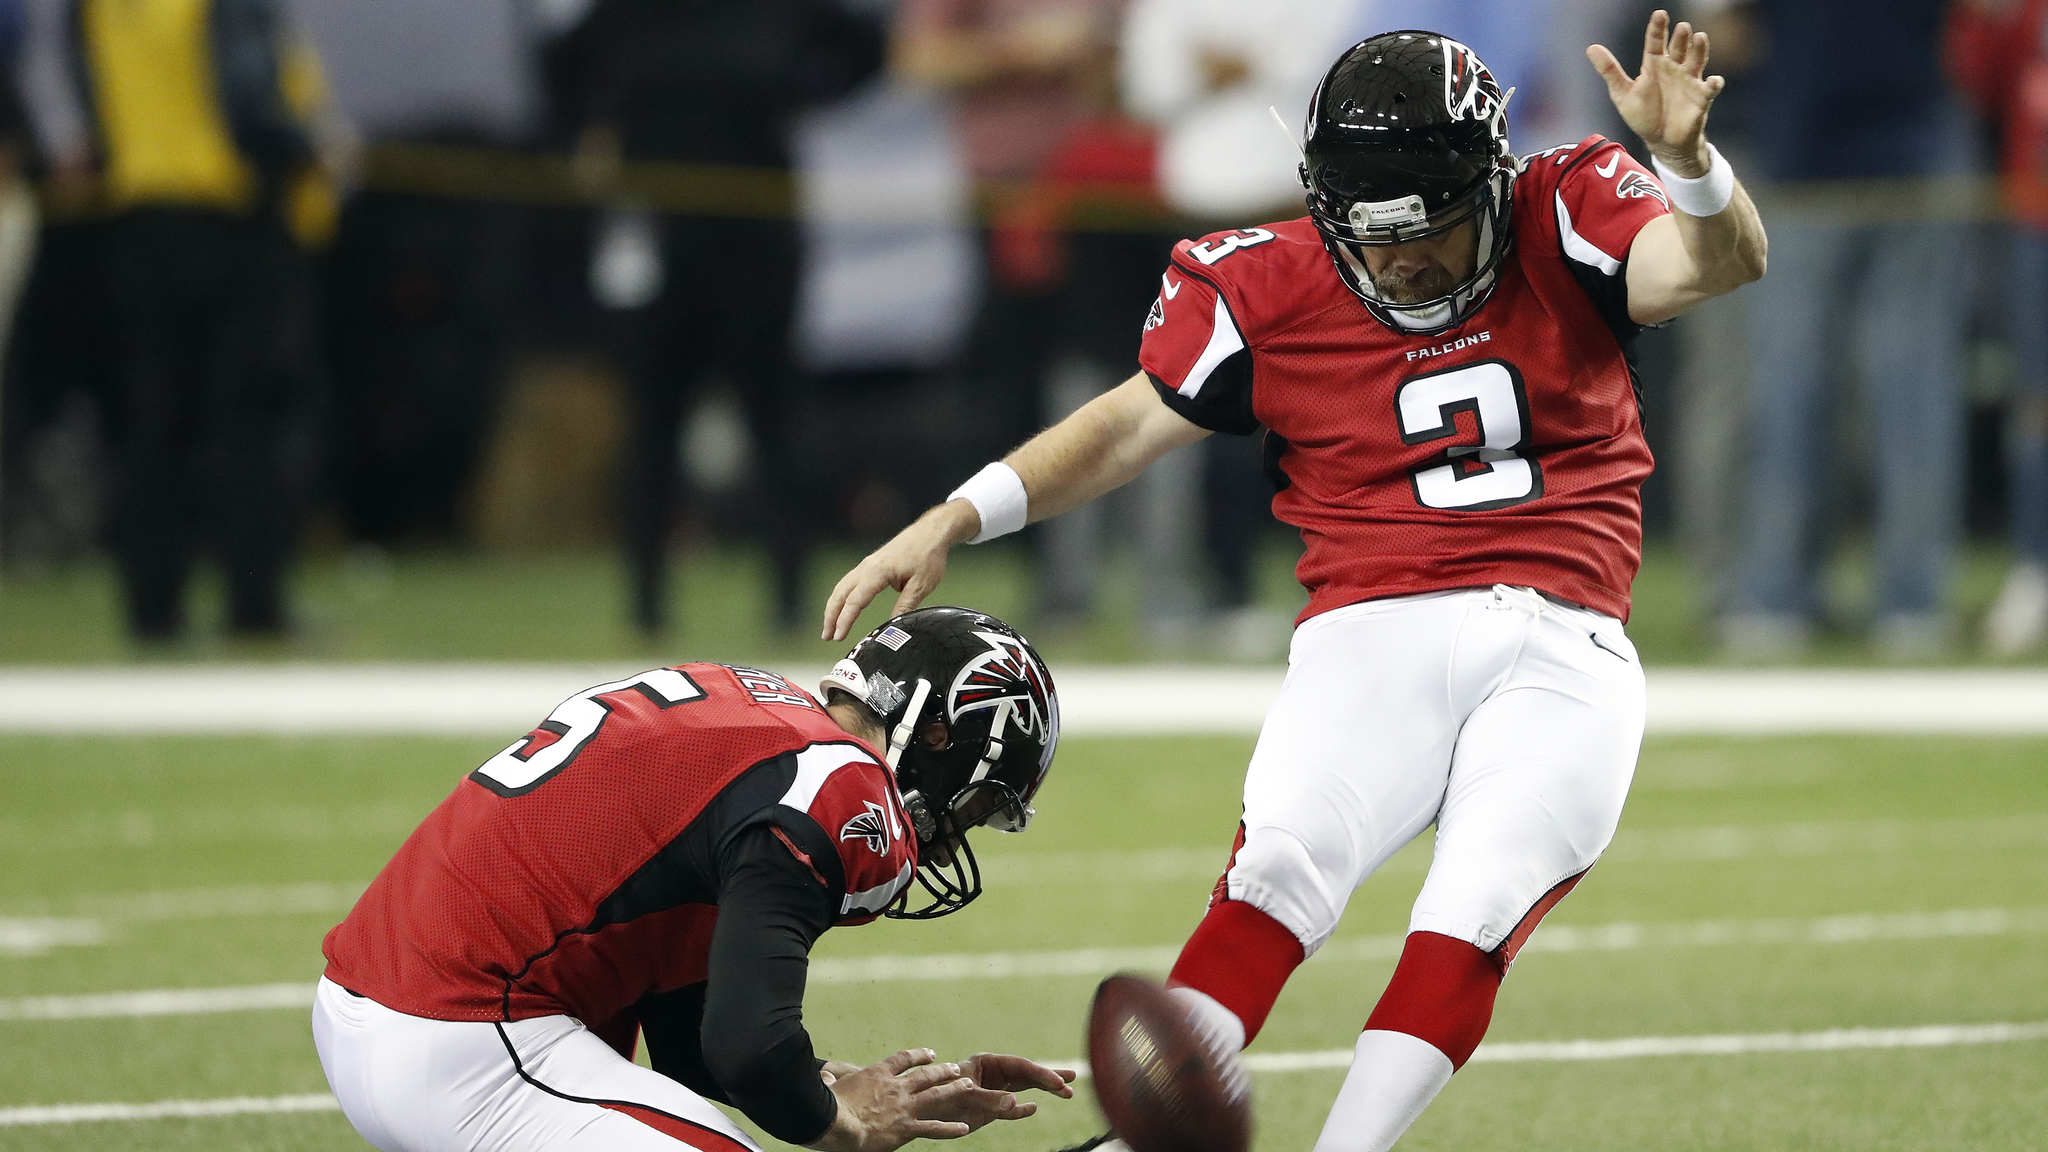 Atlanta Falcons kicker Matt Bryant warms up before an NFC divisional playoff game against the Seattle Seahawks on Jan. 17 in Atlanta. Bryant is 41, not too old to finally make it to his first Super Bowl. The Falcons’ kicker is a testament to perseverance, and truly appreciative to finally get his chance in the big game. (John Bazemore | The Associated Press file)